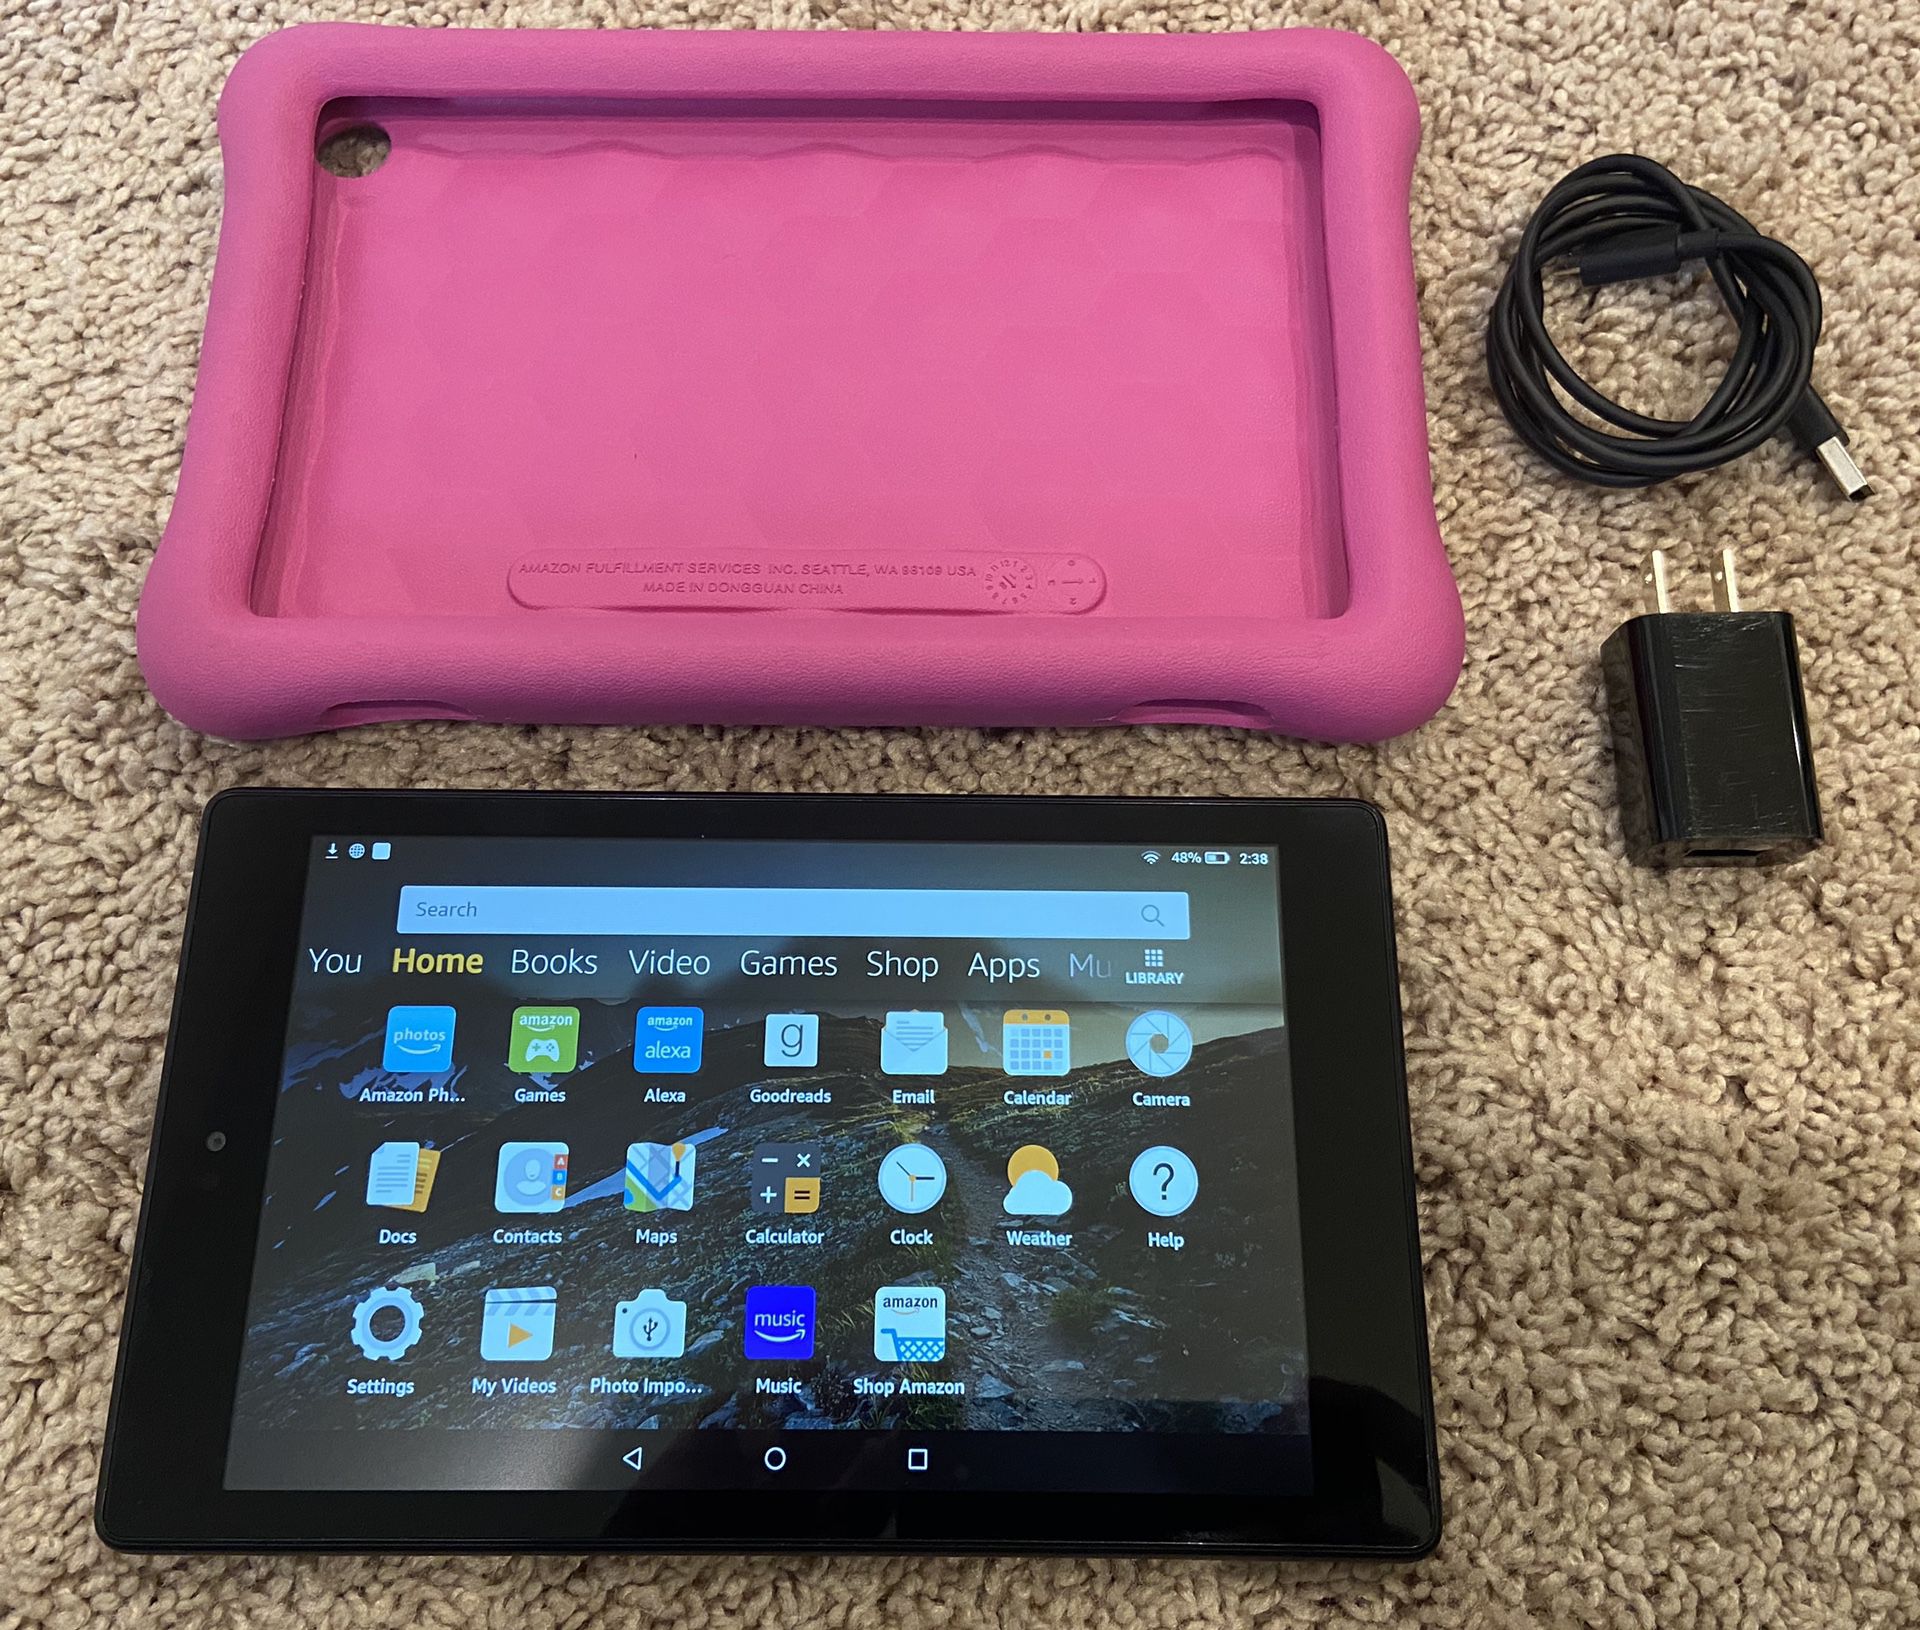 Kindle Fire HD 8” 32GB Tablet with Pink Kid-proof case